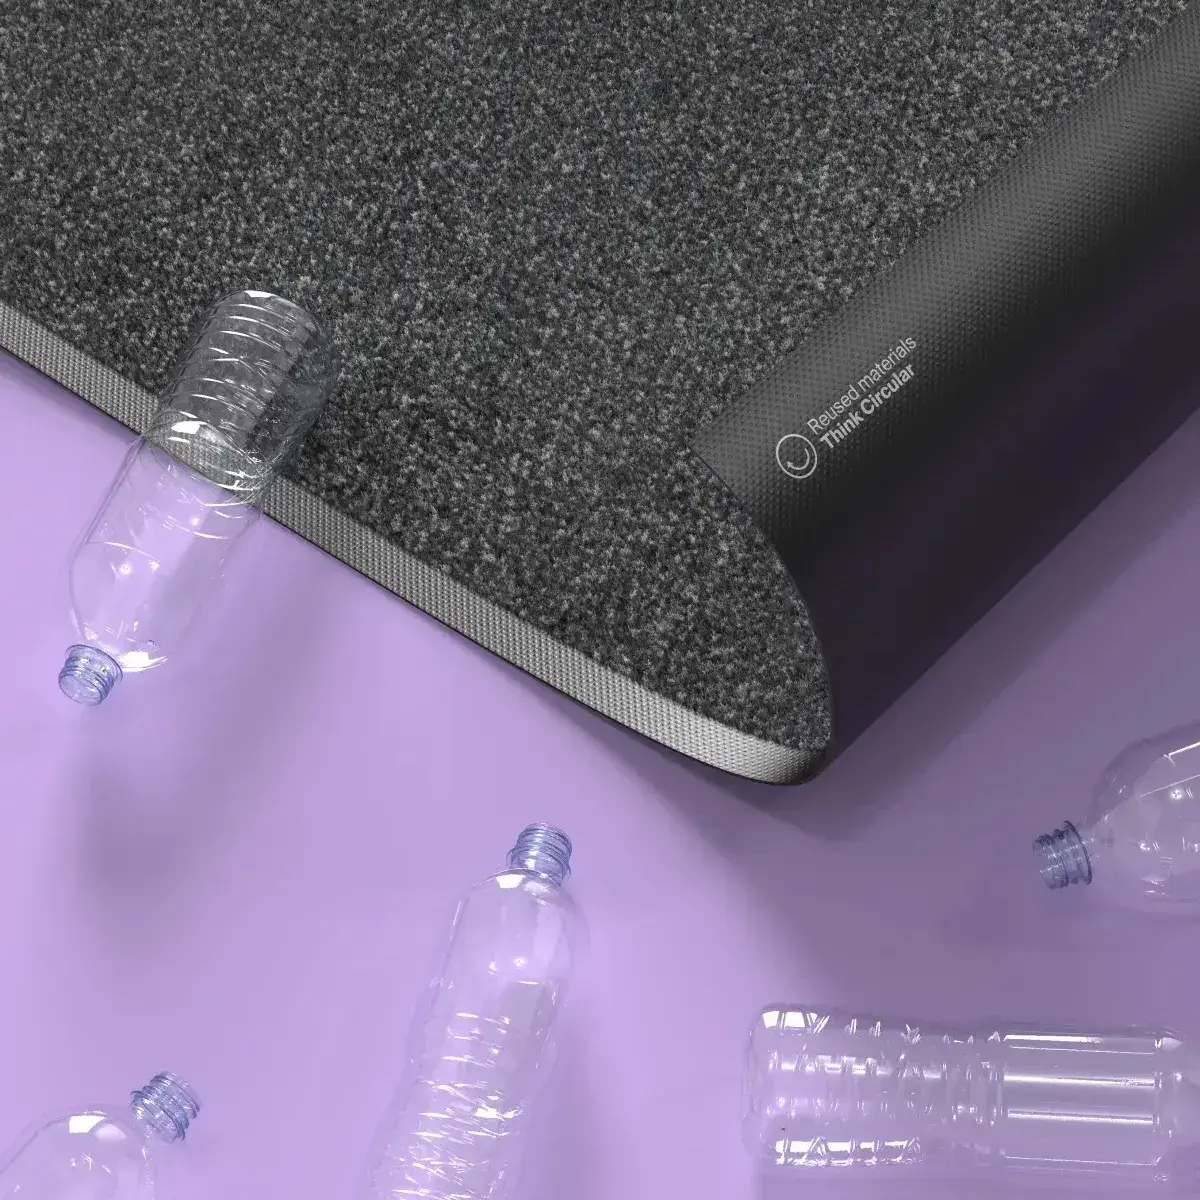 PET bottles and CWS sustainable dust care mat made from PET